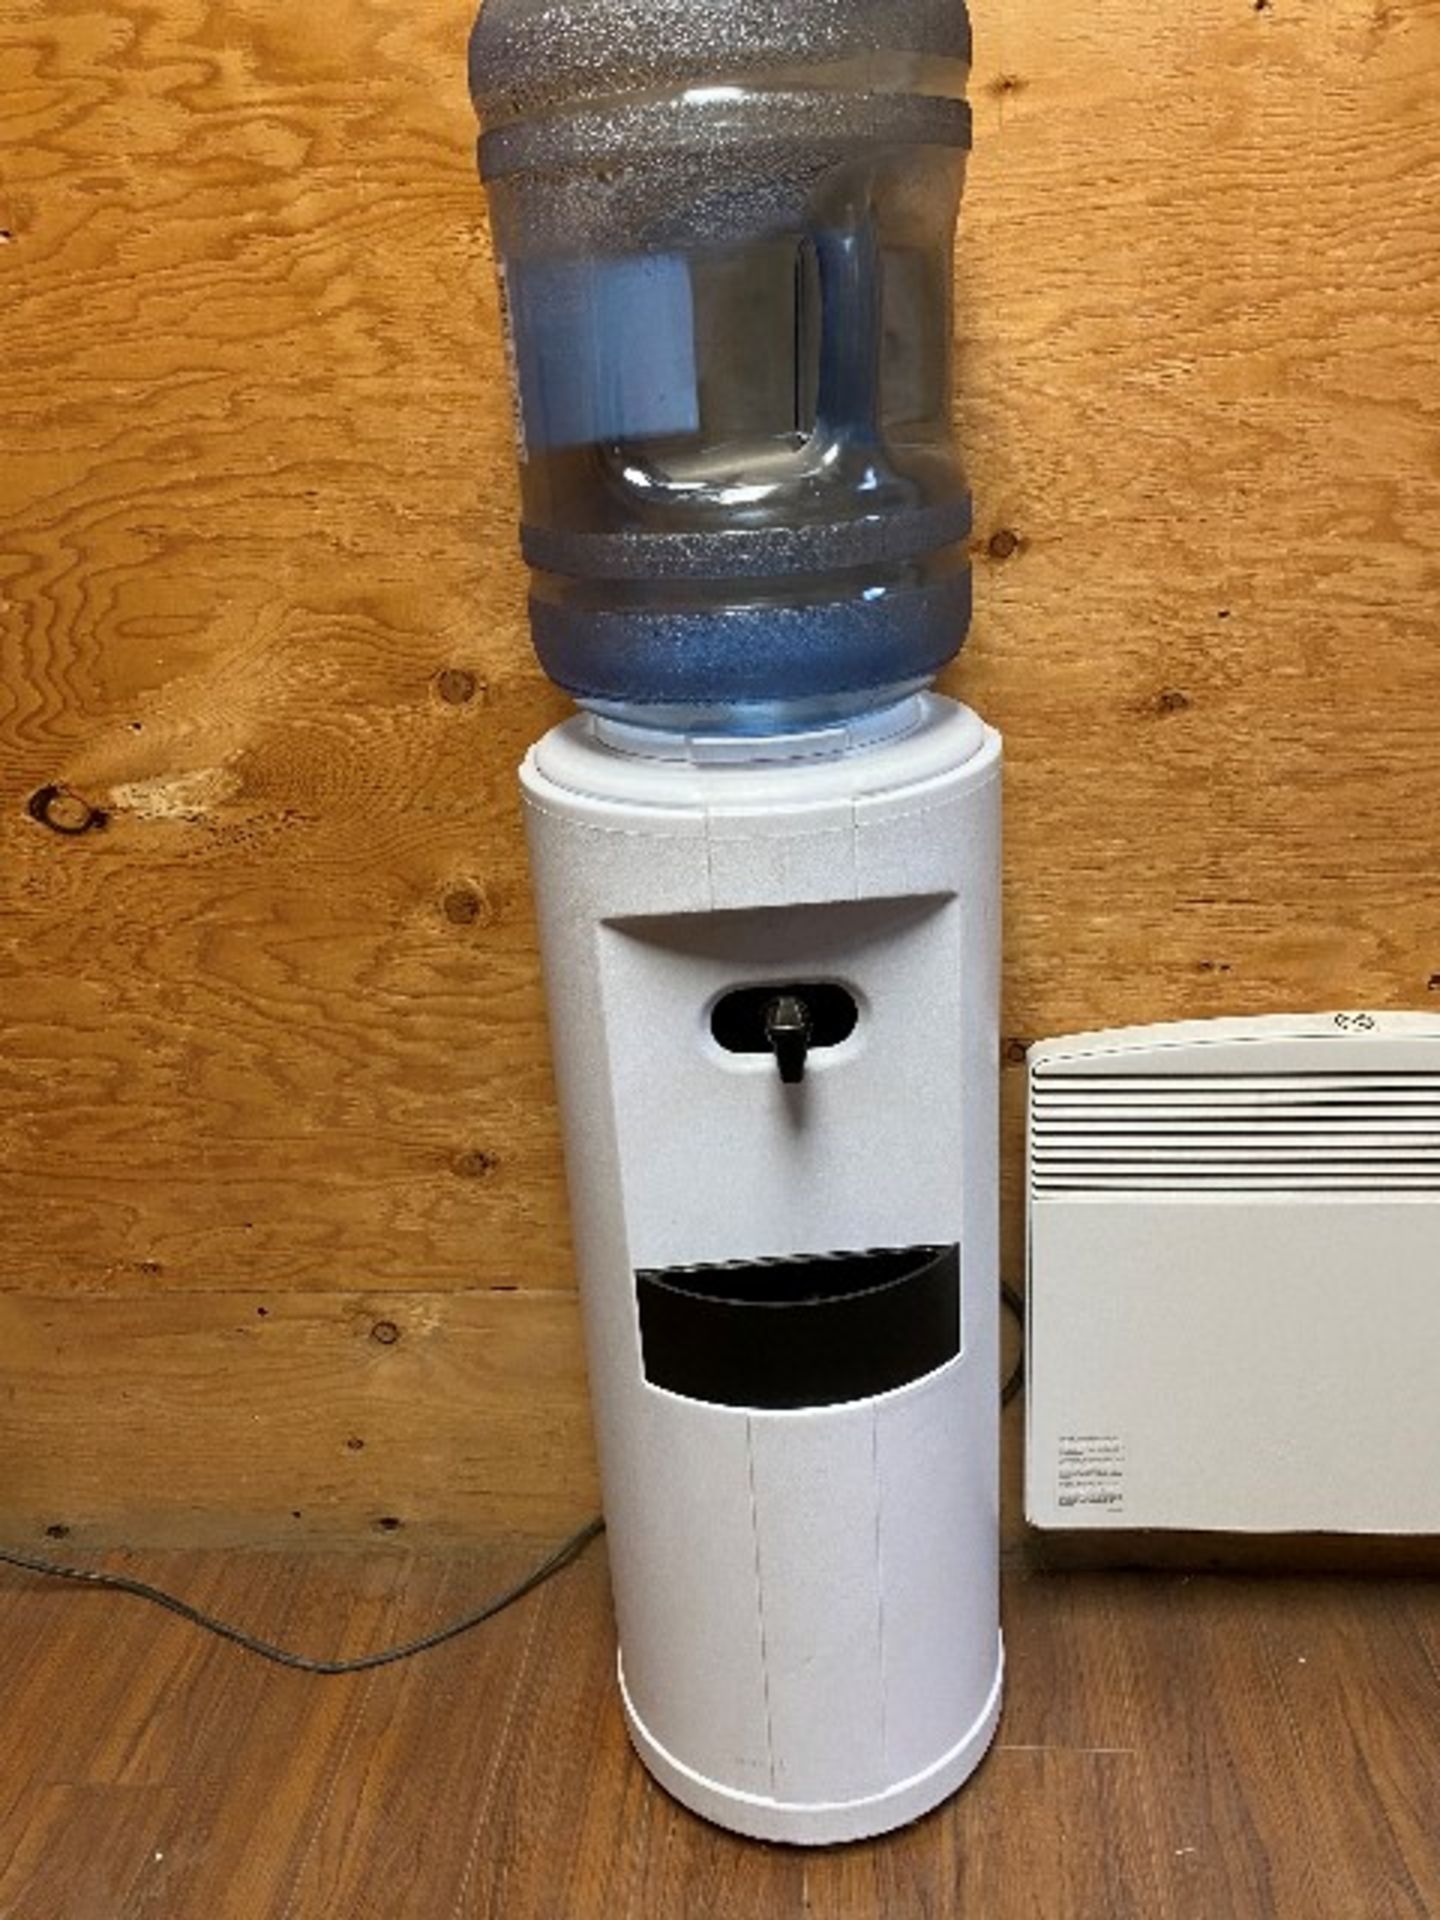 Water dispensing machine (bottle not included) - Image 2 of 2